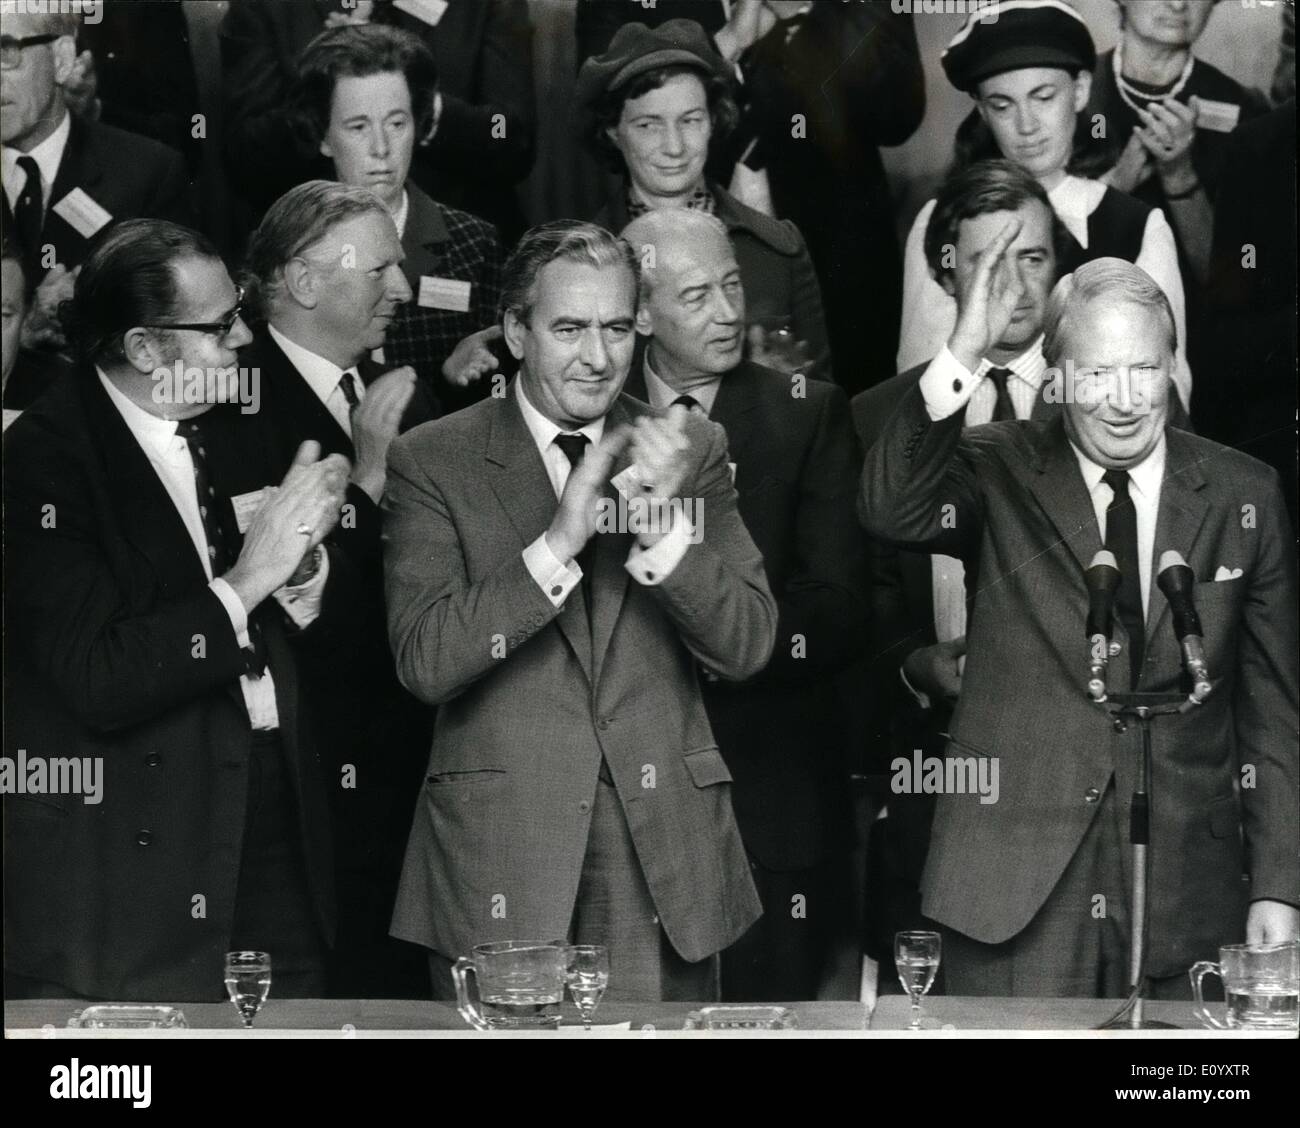 Oct. 10, 1971 - Mr. Heath speaks at the Tory conference at Brighton.: This morning Mr. Edward Heath the Prime Minister addressed the Conservative Party Conference on the final day. Photo shows Mr. Heath gives a wave at the end of his speech while members of the cabinet which includes Mr. Reginald Maudling, Home Secretary, left and Mr. Peter Thomas, Welsch Secretary centre. Stock Photo